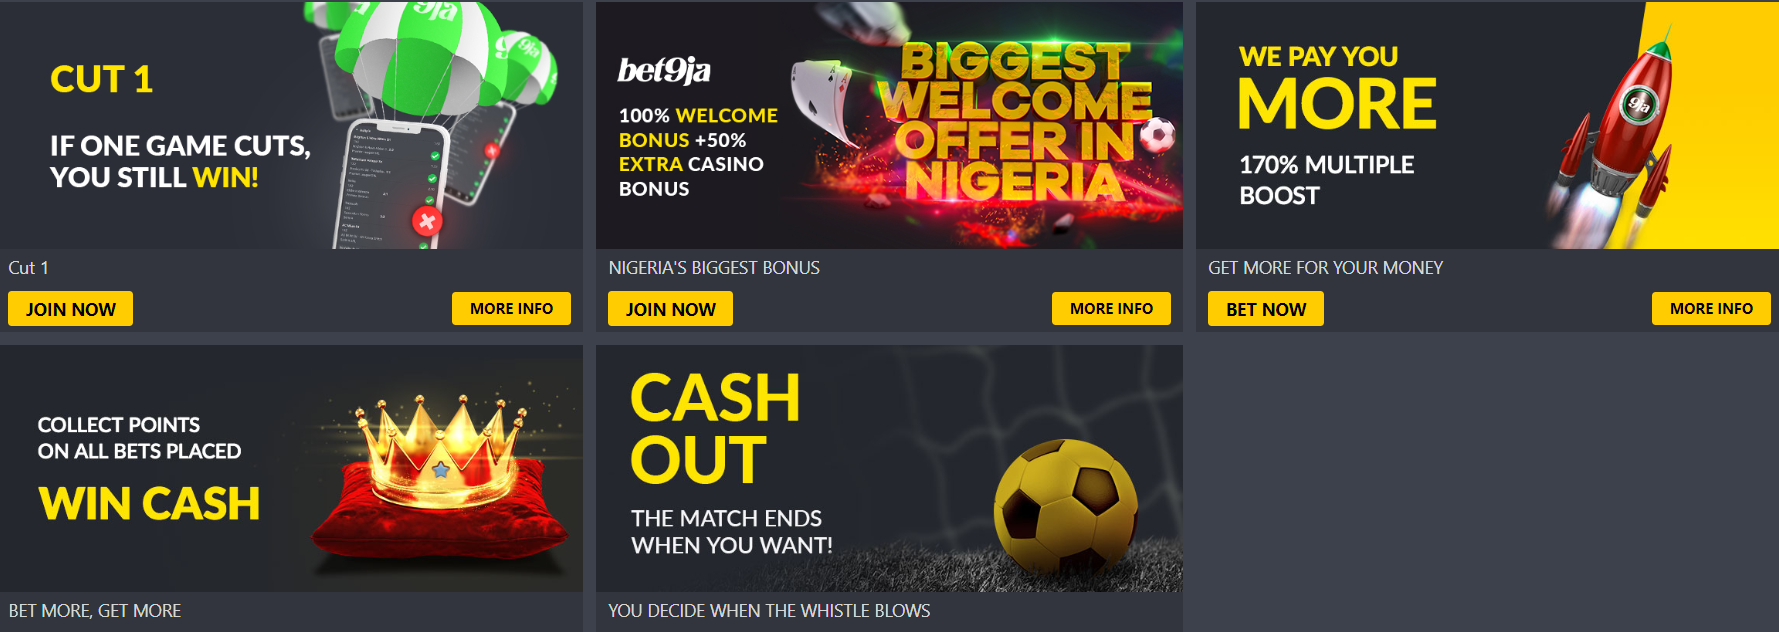 Other available promotions at Bet9ja